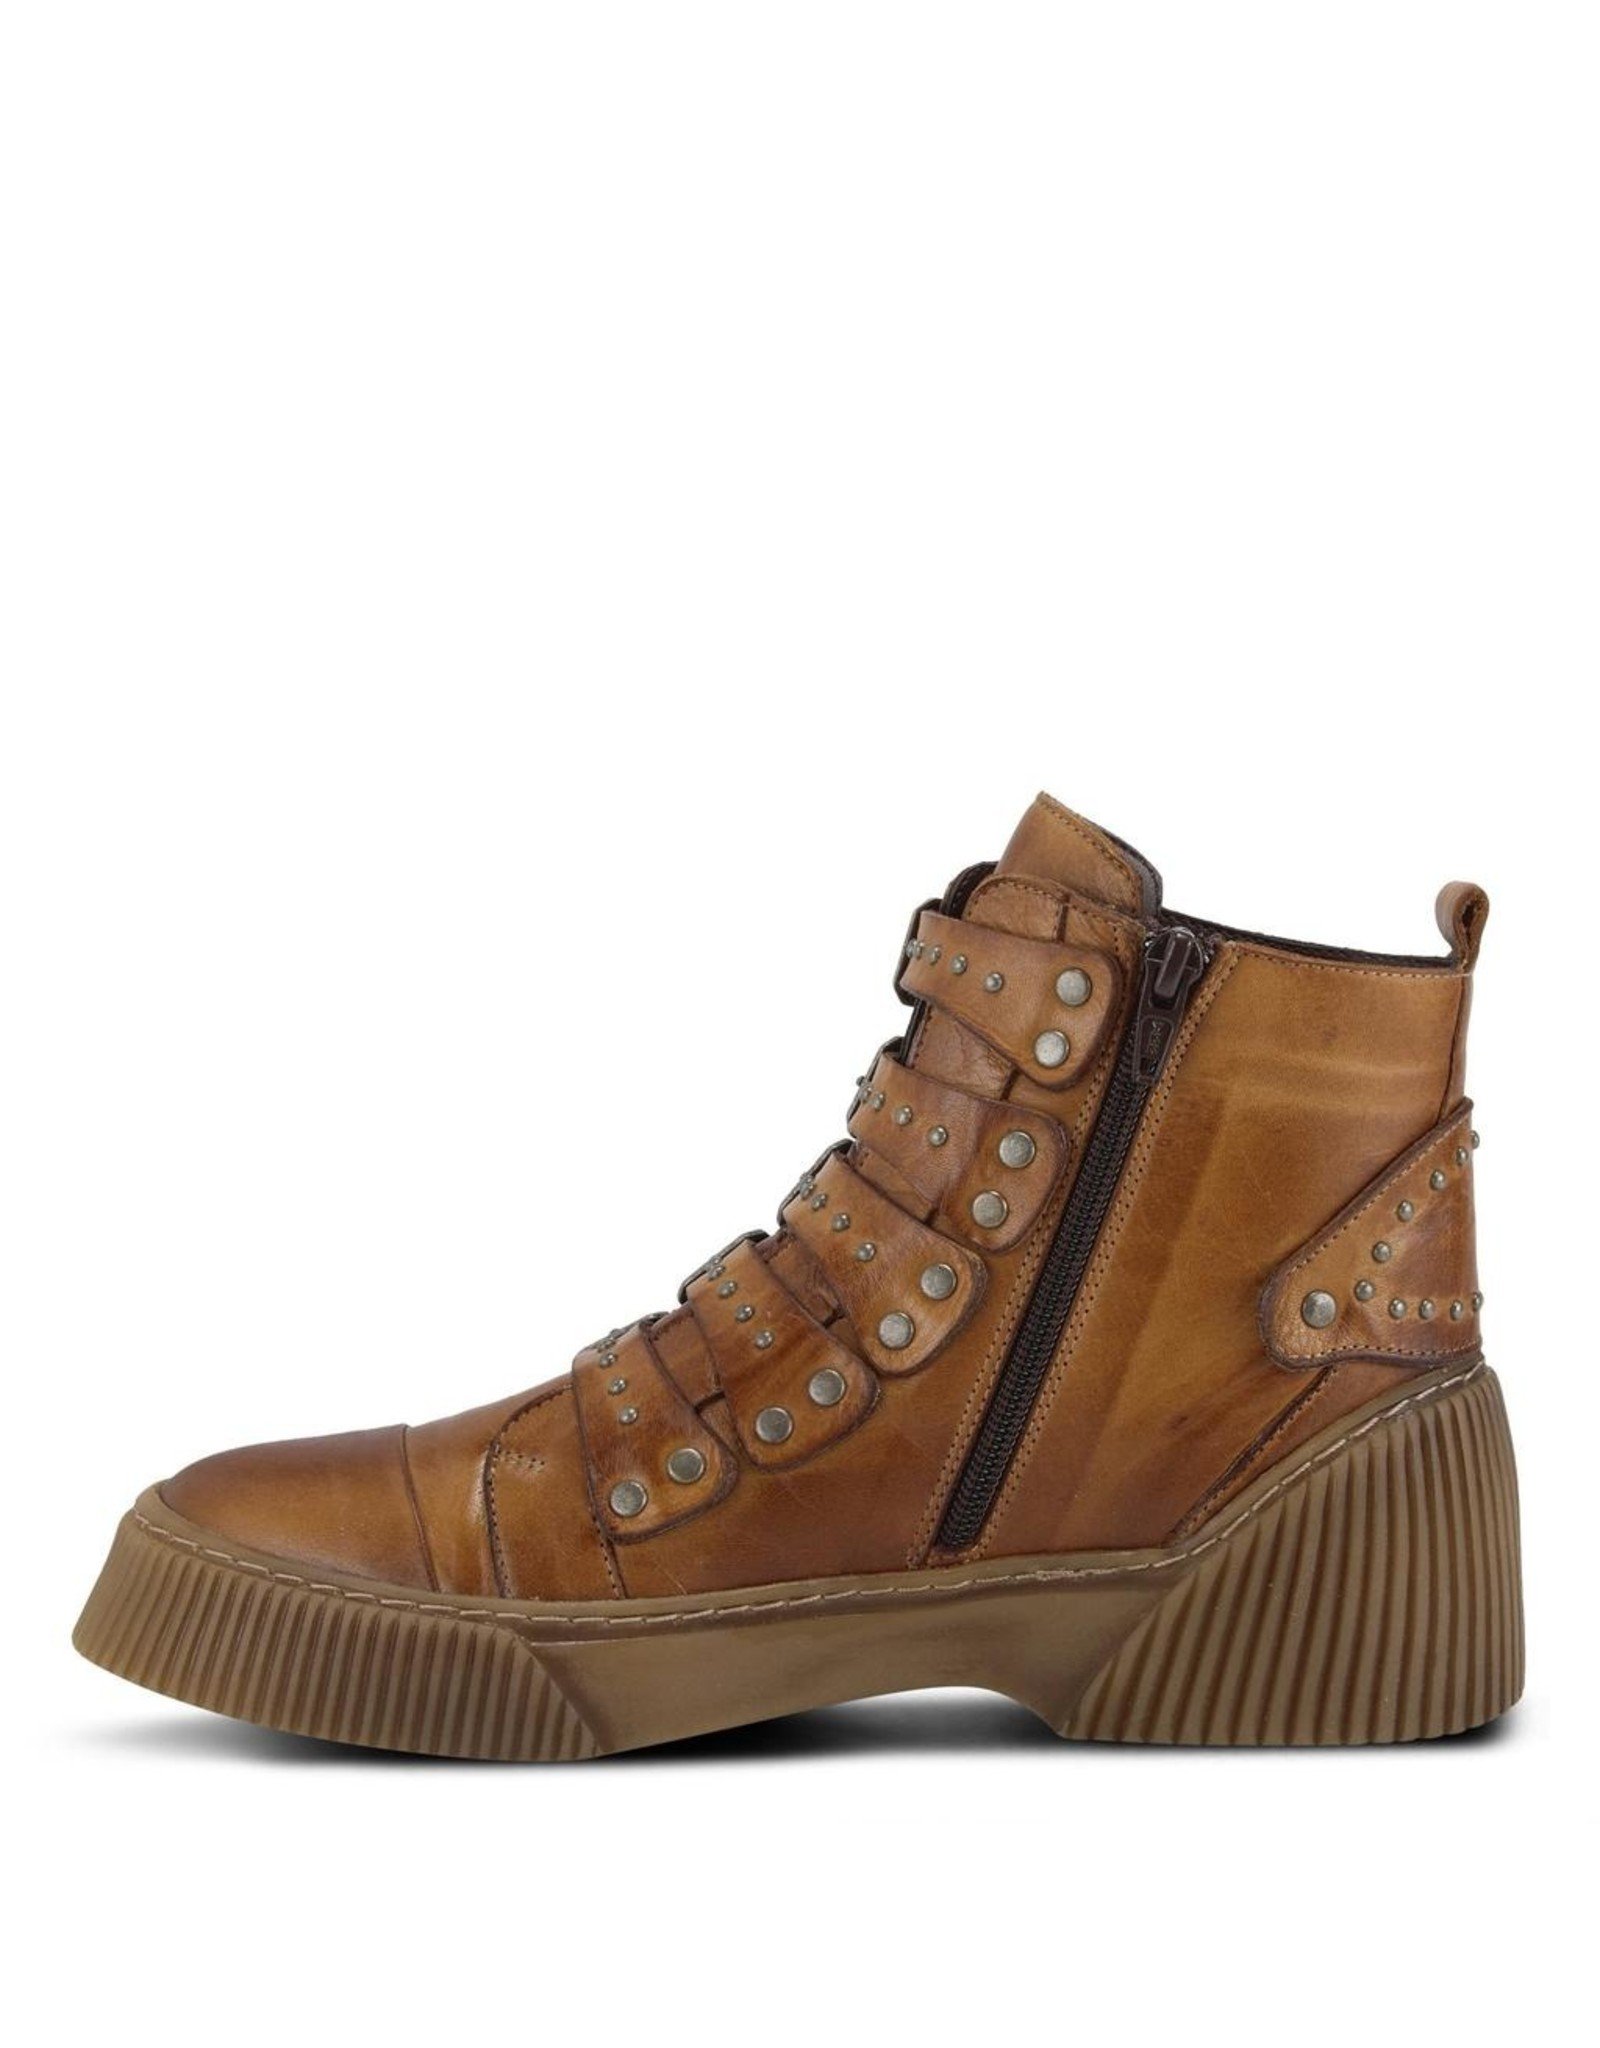 BeCool Camel Leather Boot